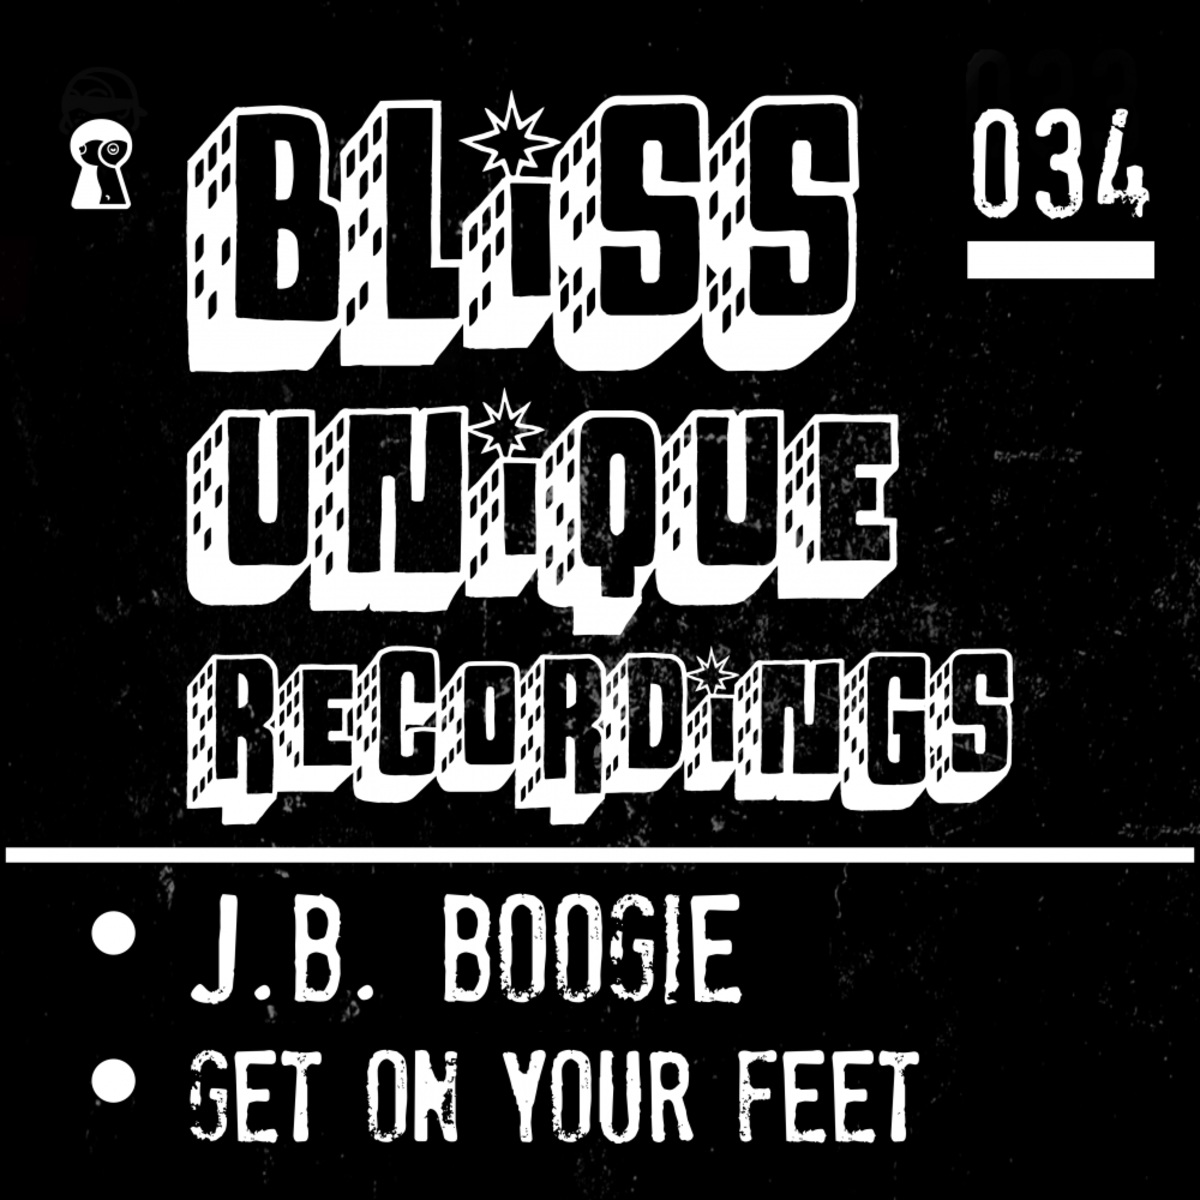 J.B. Boogie - Get On Your Feet / Bliss Unique Recordings